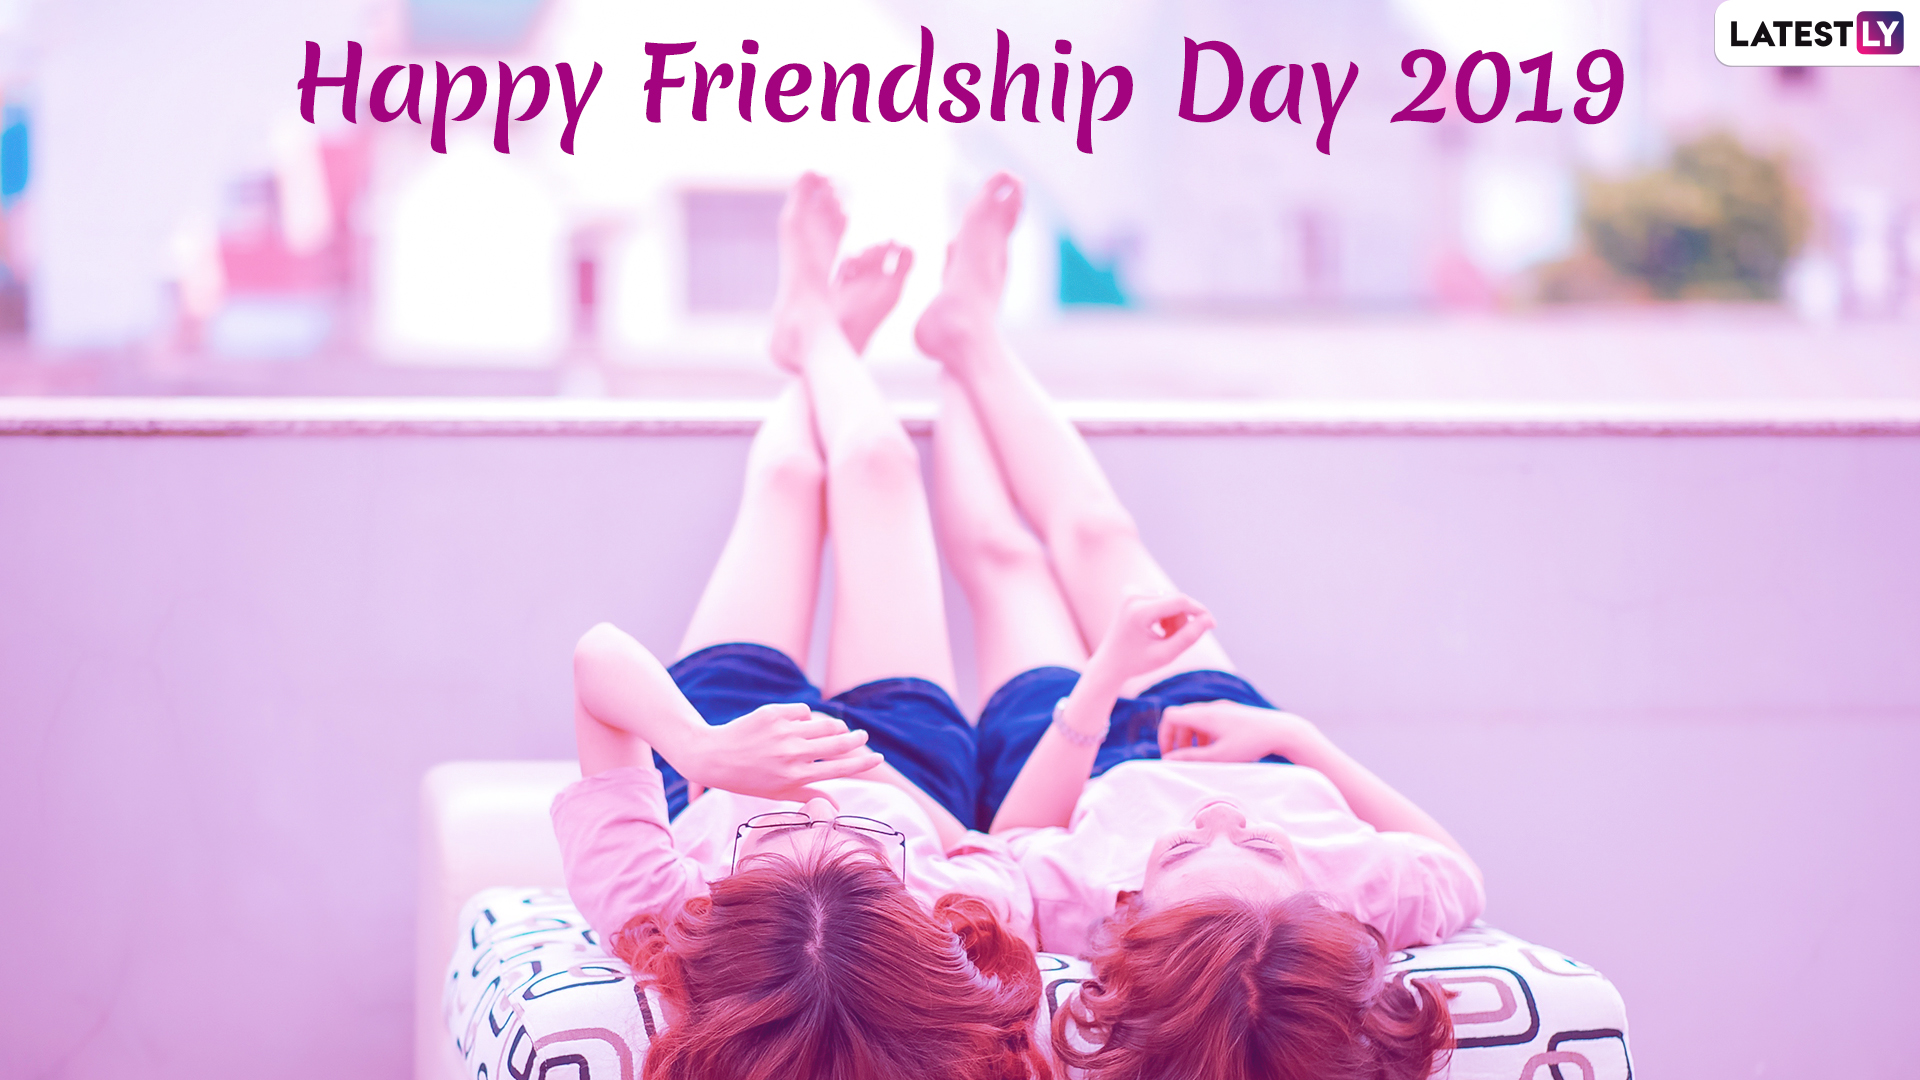 Free Download Friendship Images For Mobile - Happy Friendship Day Quotes Messages - HD Wallpaper 